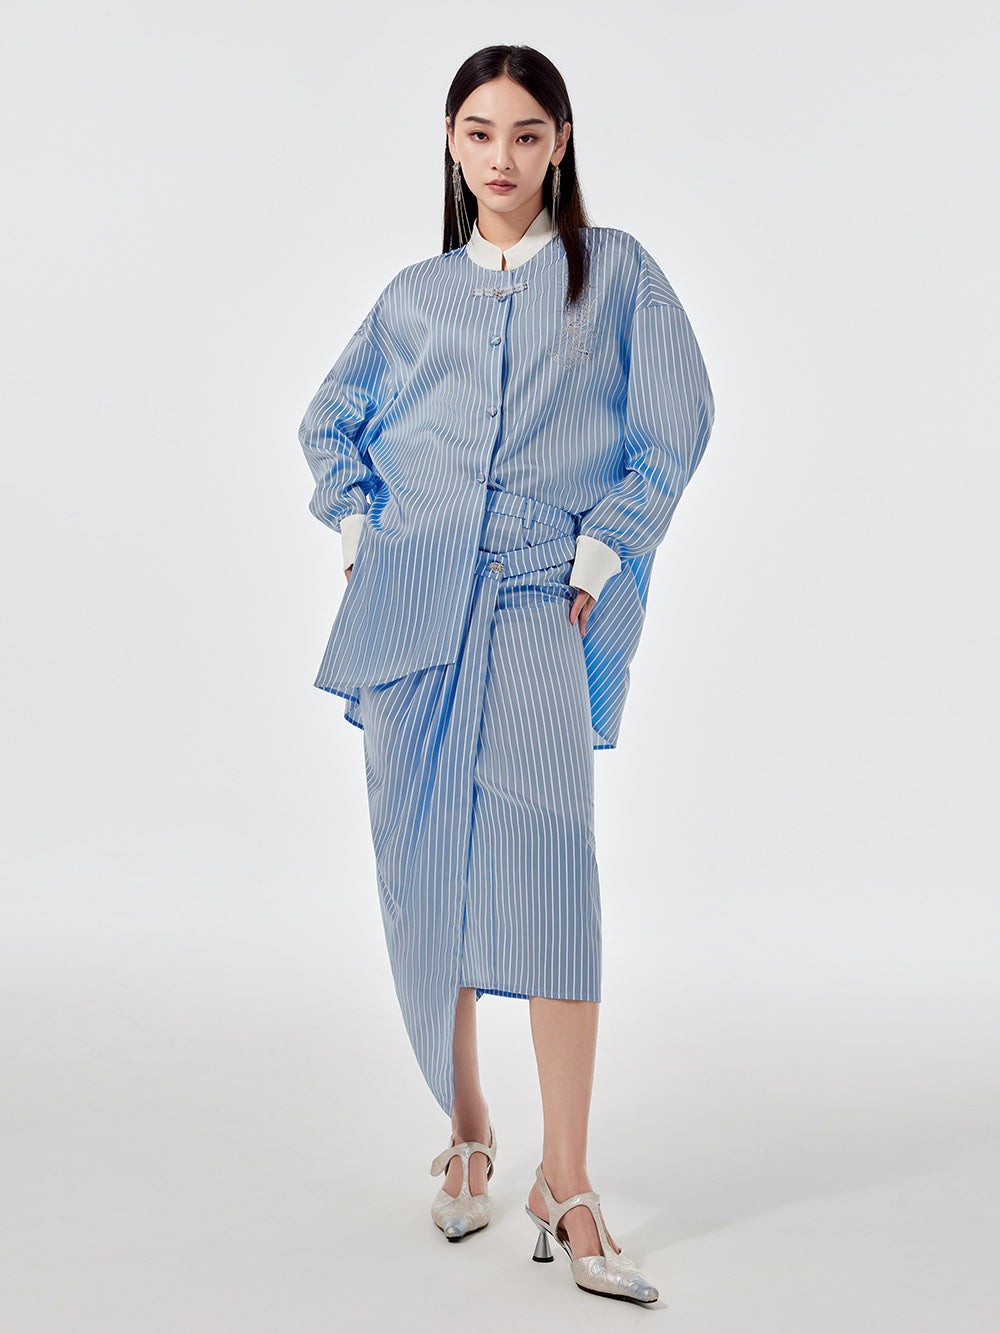 Linglong Series "Biluo" New Chinese Style Blue and White Striped Skirt